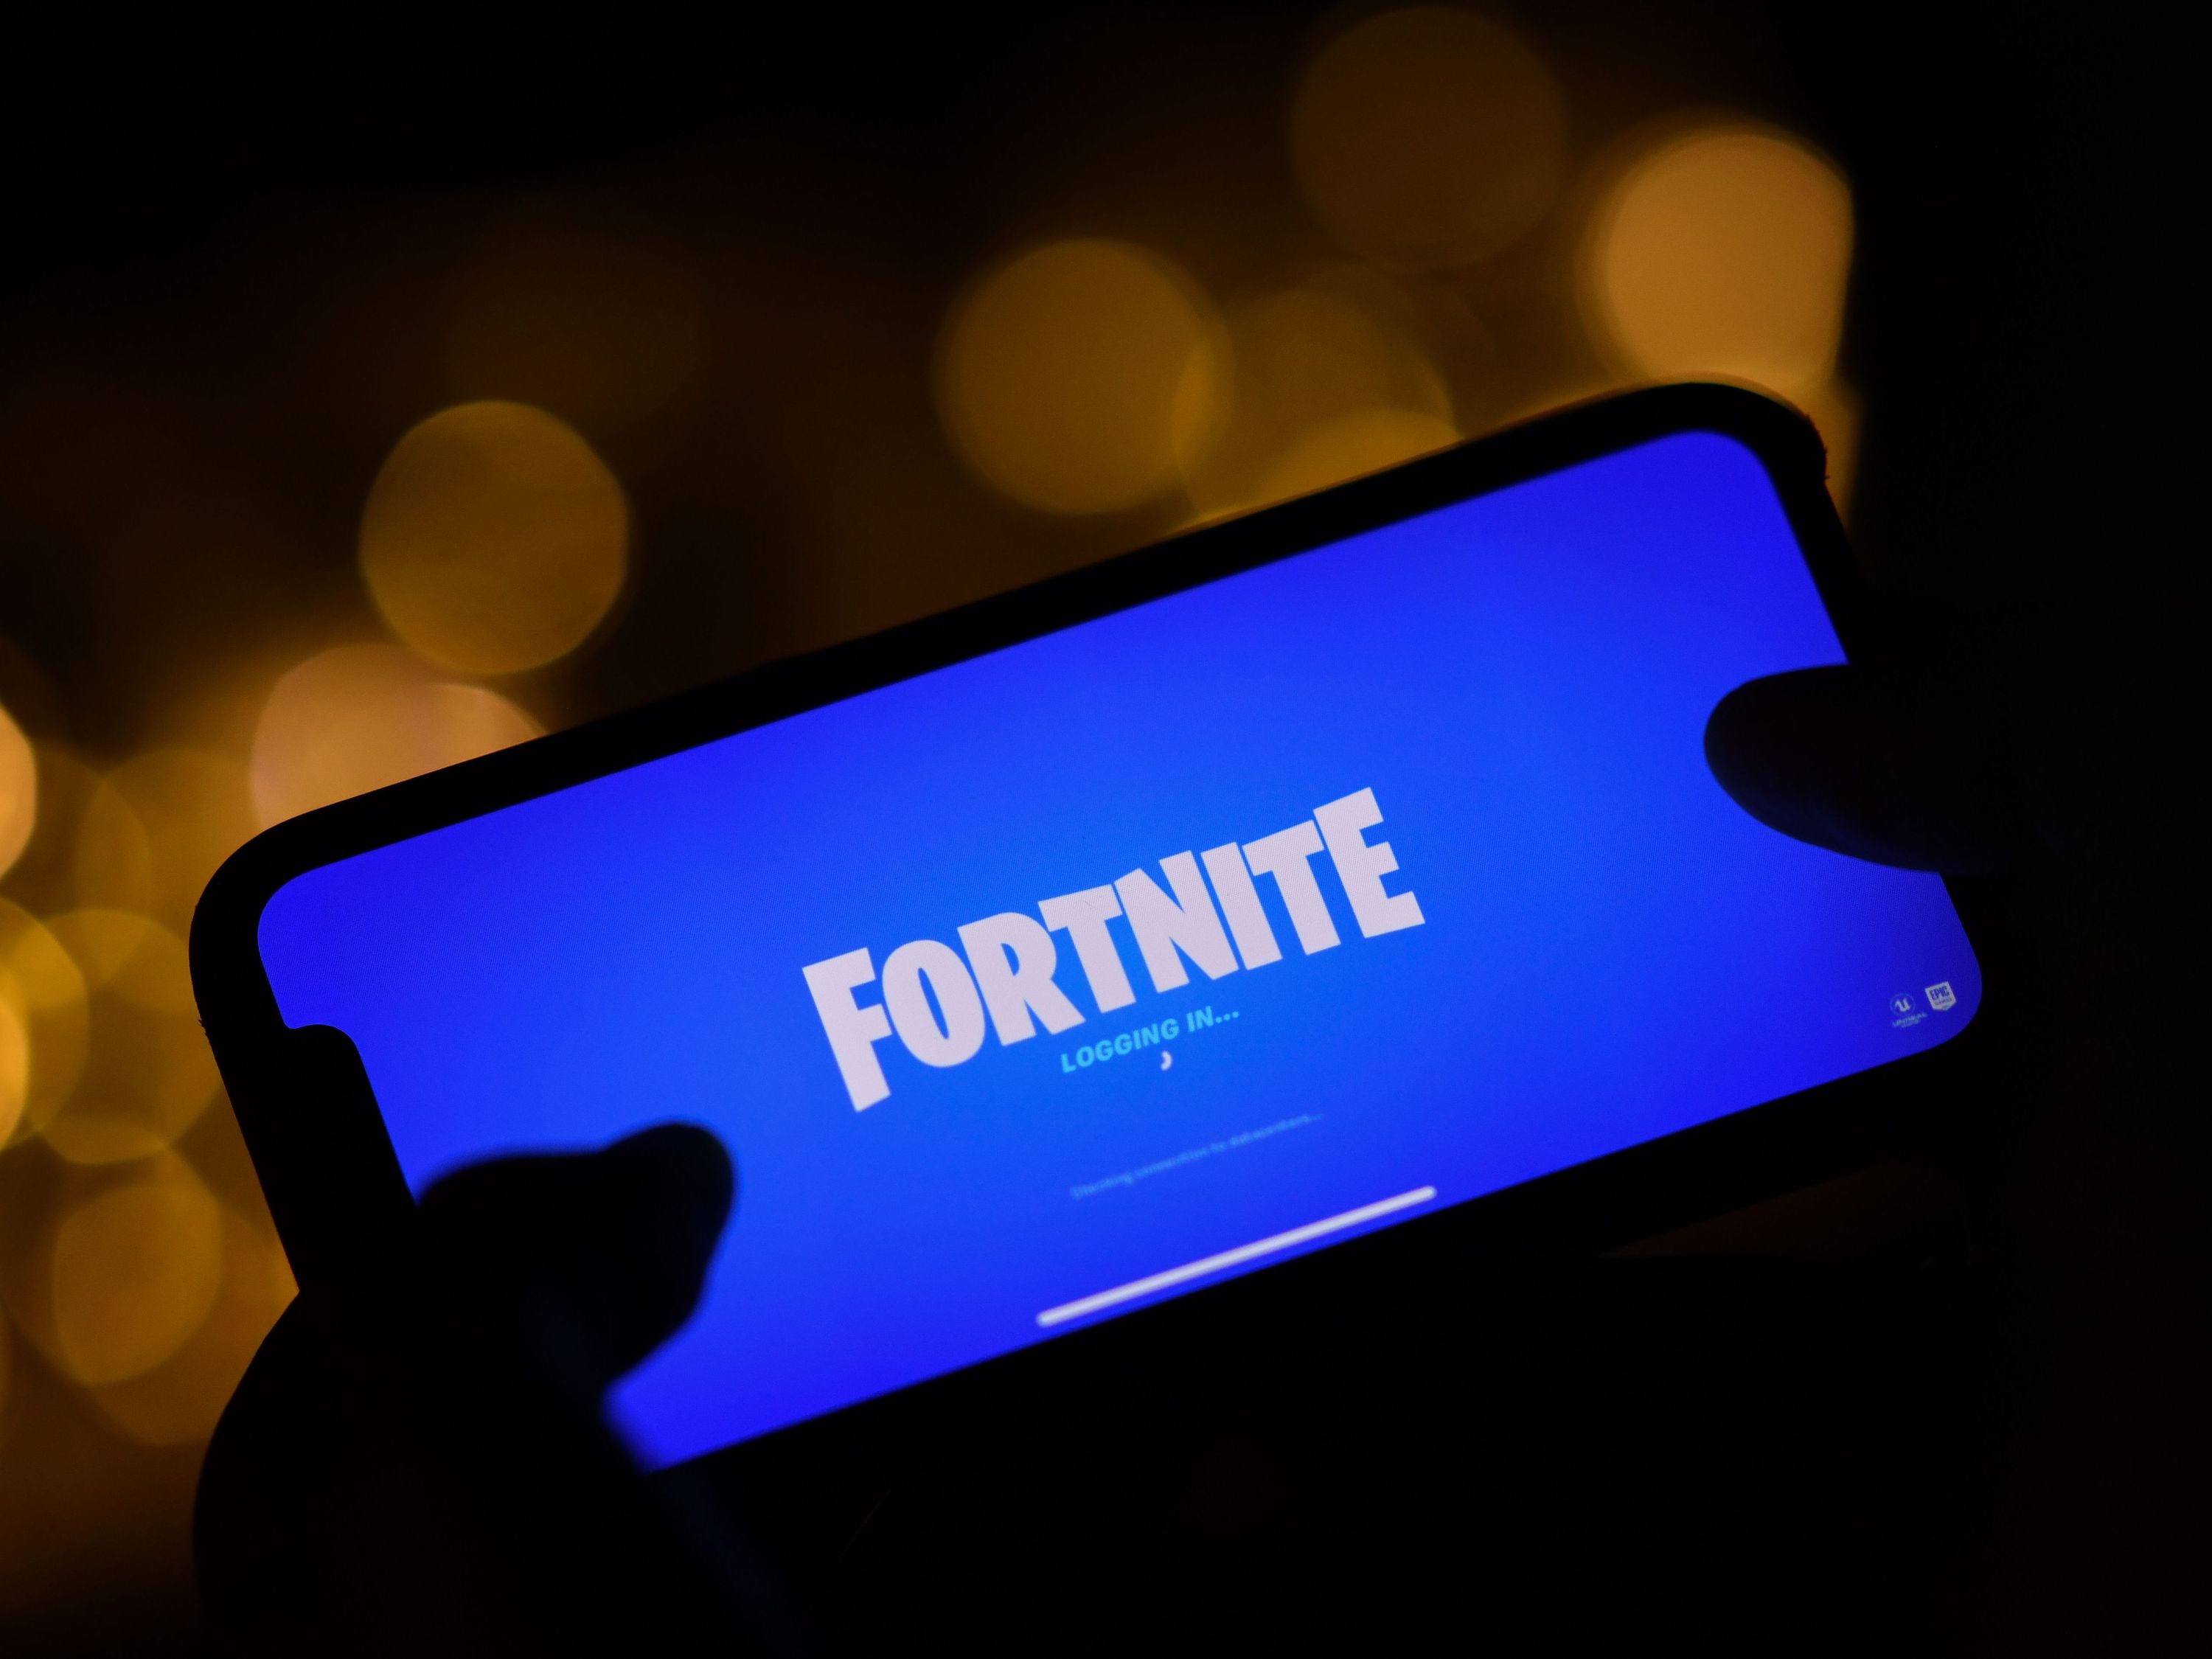 Fortnite to return to Apple devices via Nvidia cloud gaming service: BBC